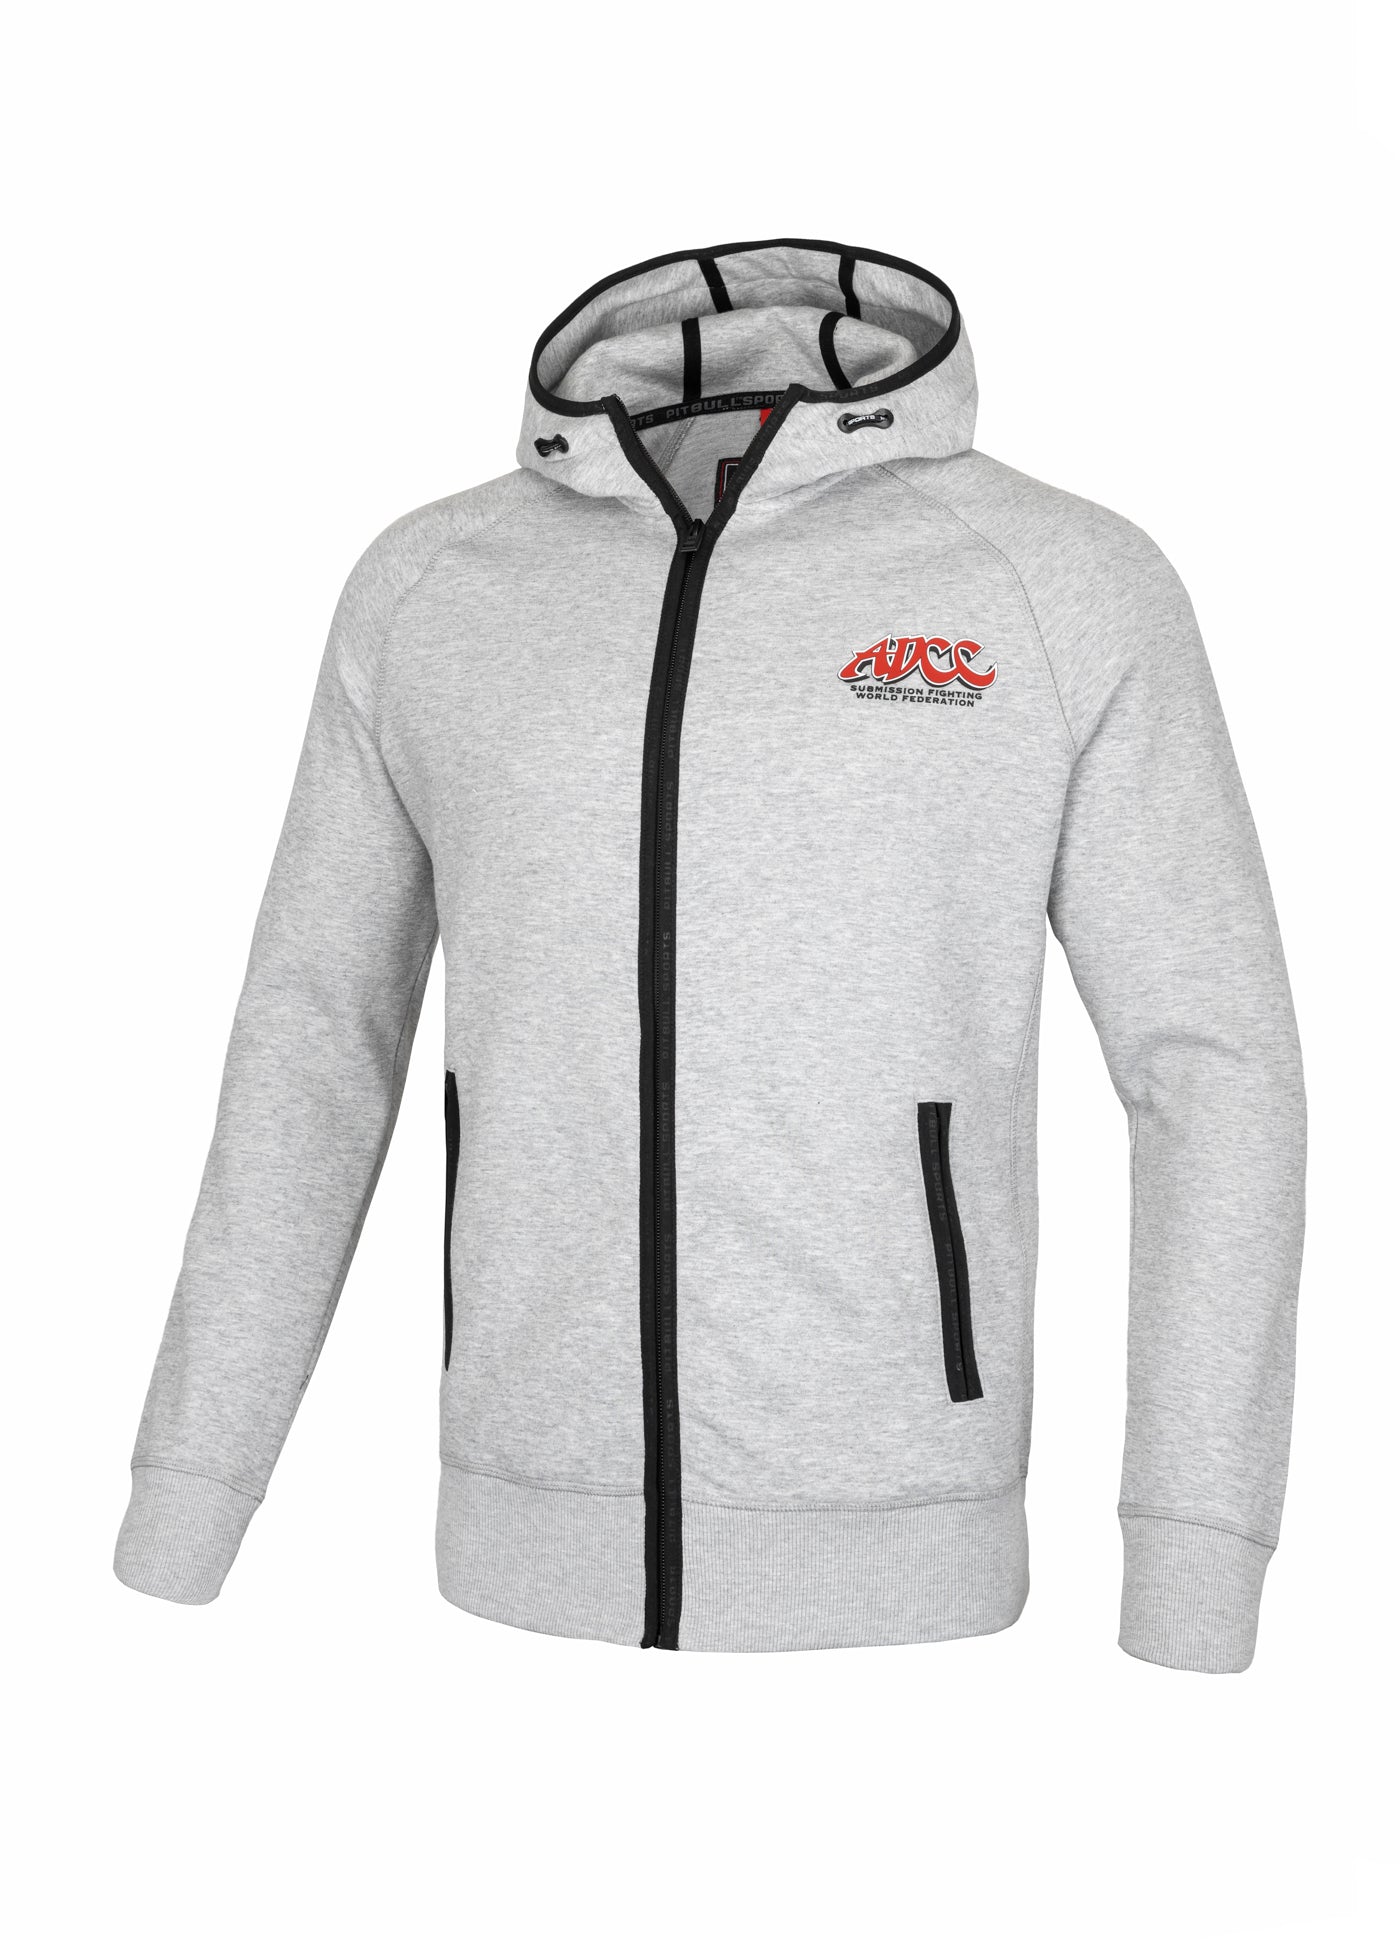 Hooded Zip ADCC 2021 Grey